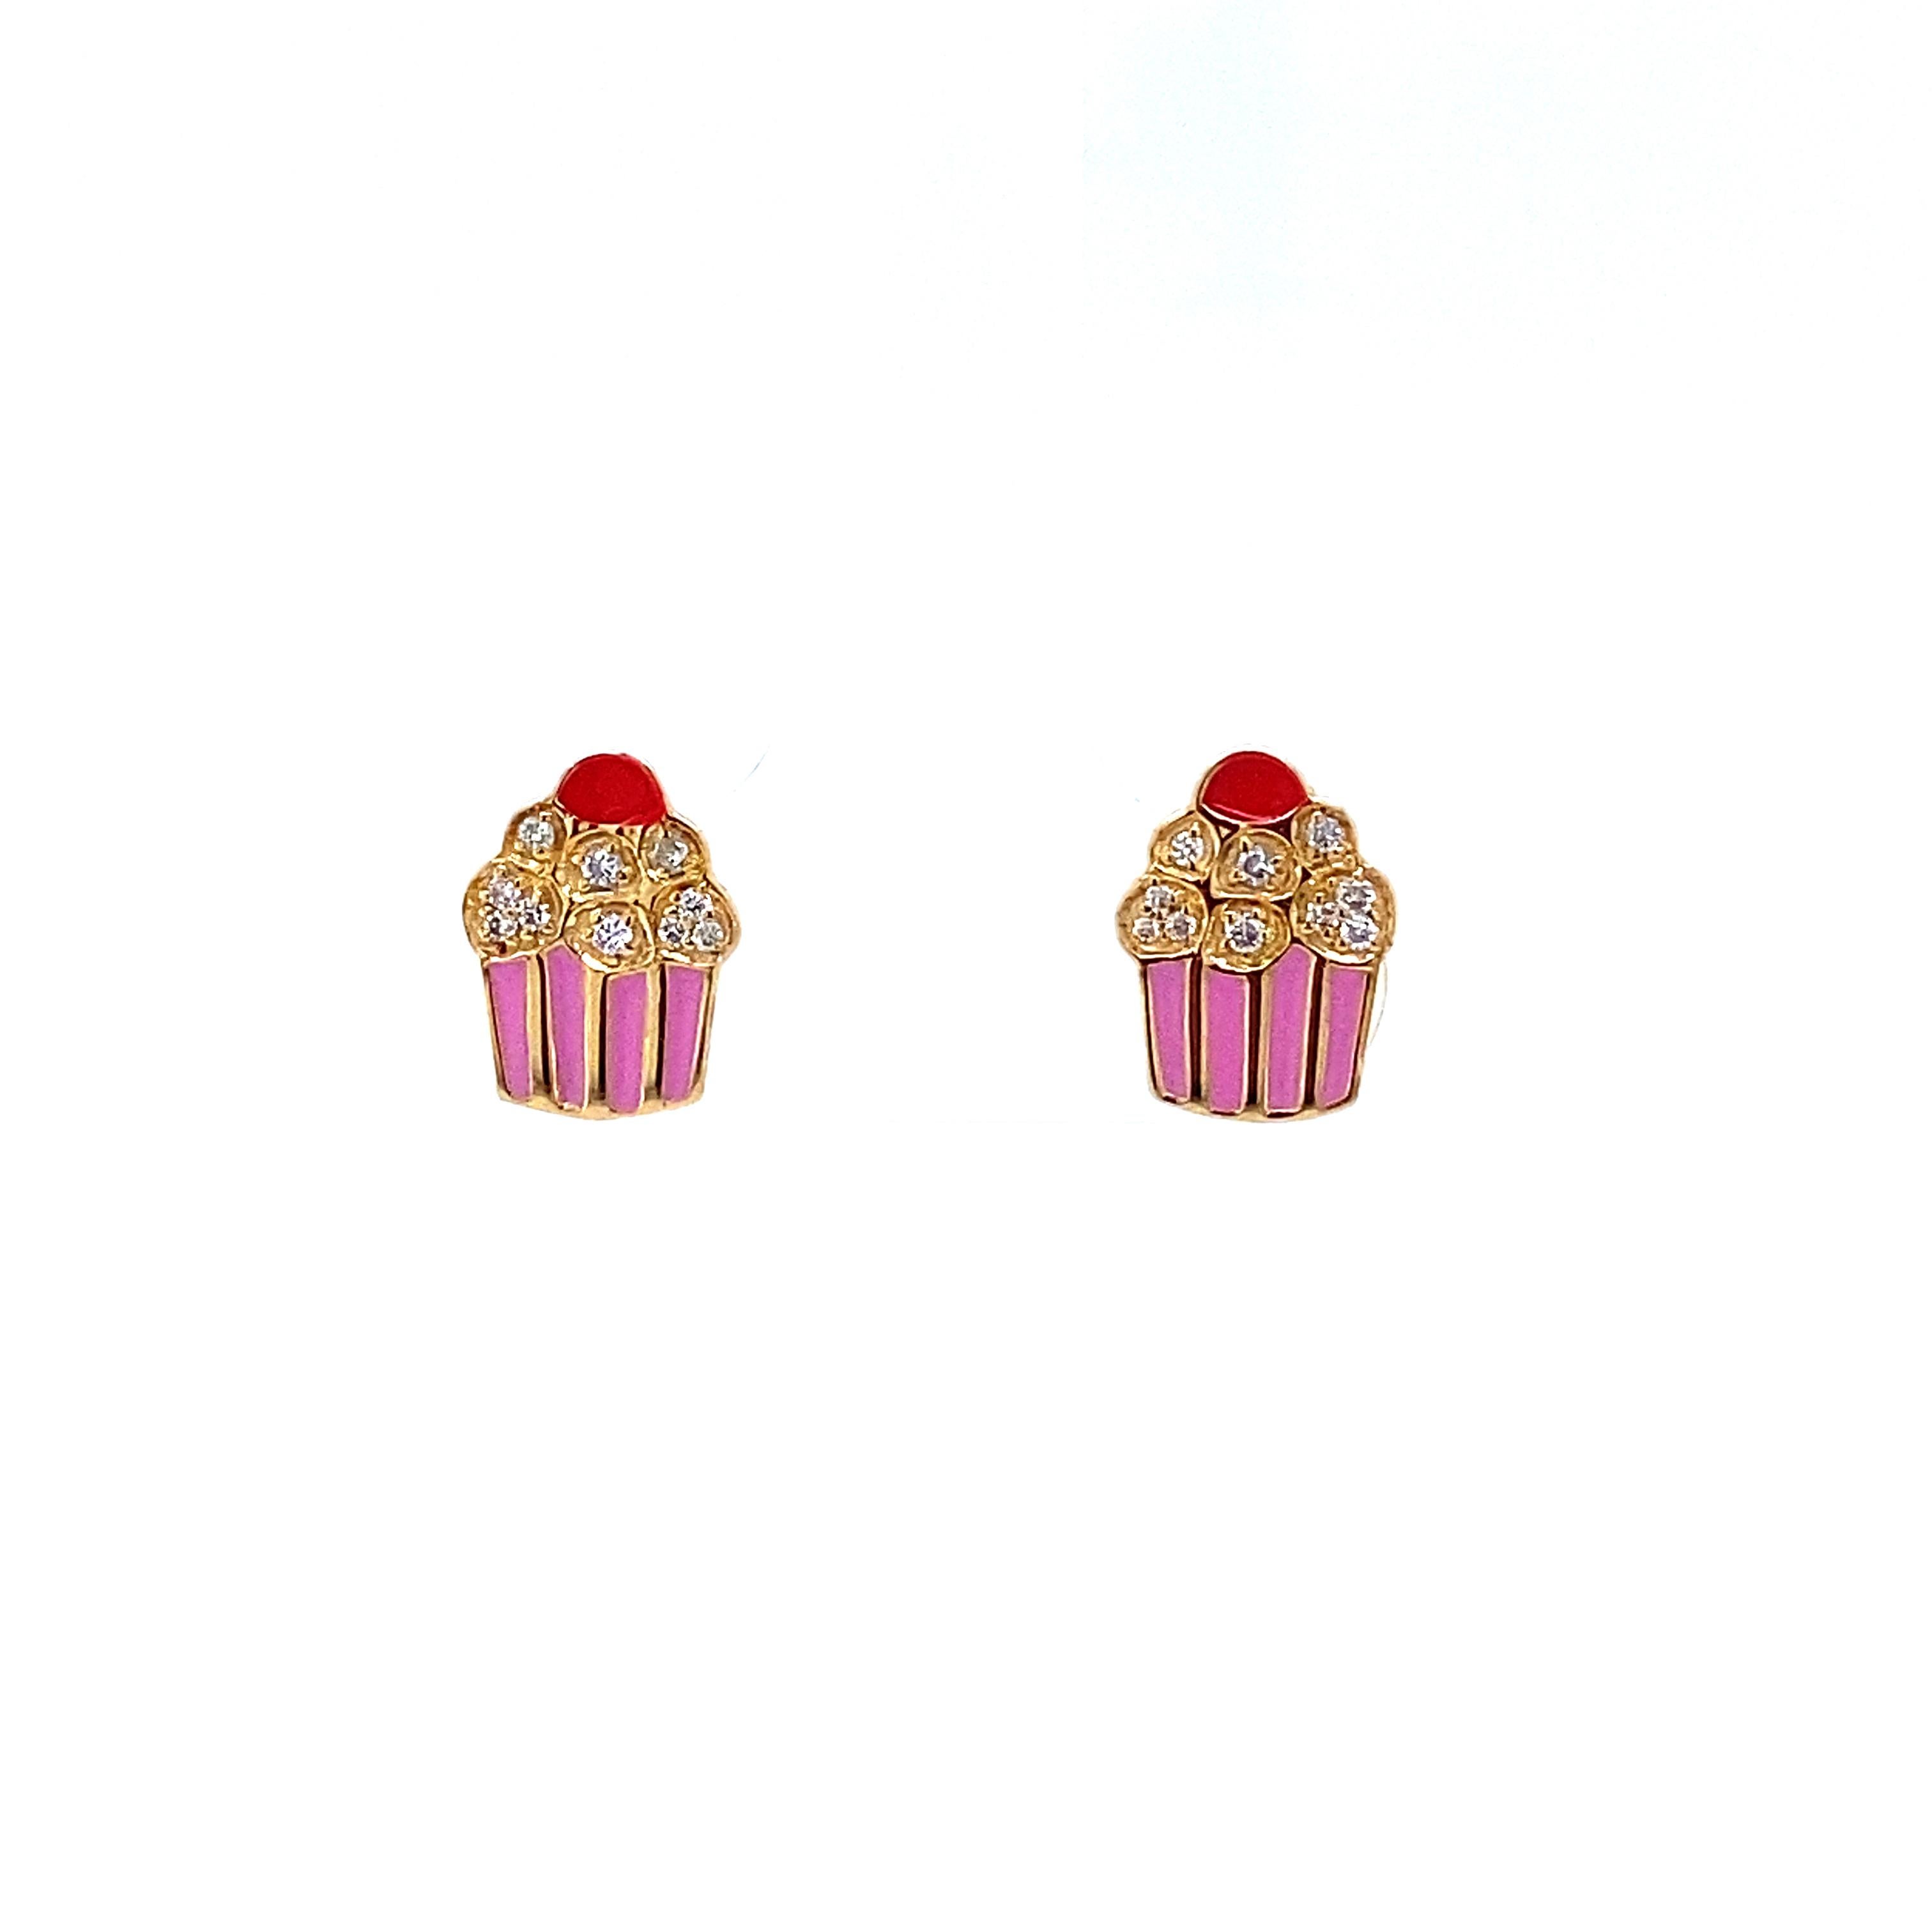 
Cute Enameled Cupcake Diamond Earrings in 18K Solid Gold are delightful and playful jewelry pieces designed with young children in mind. These earrings feature an adorable cupcake design with colorful enamel detailing, expertly crafted from